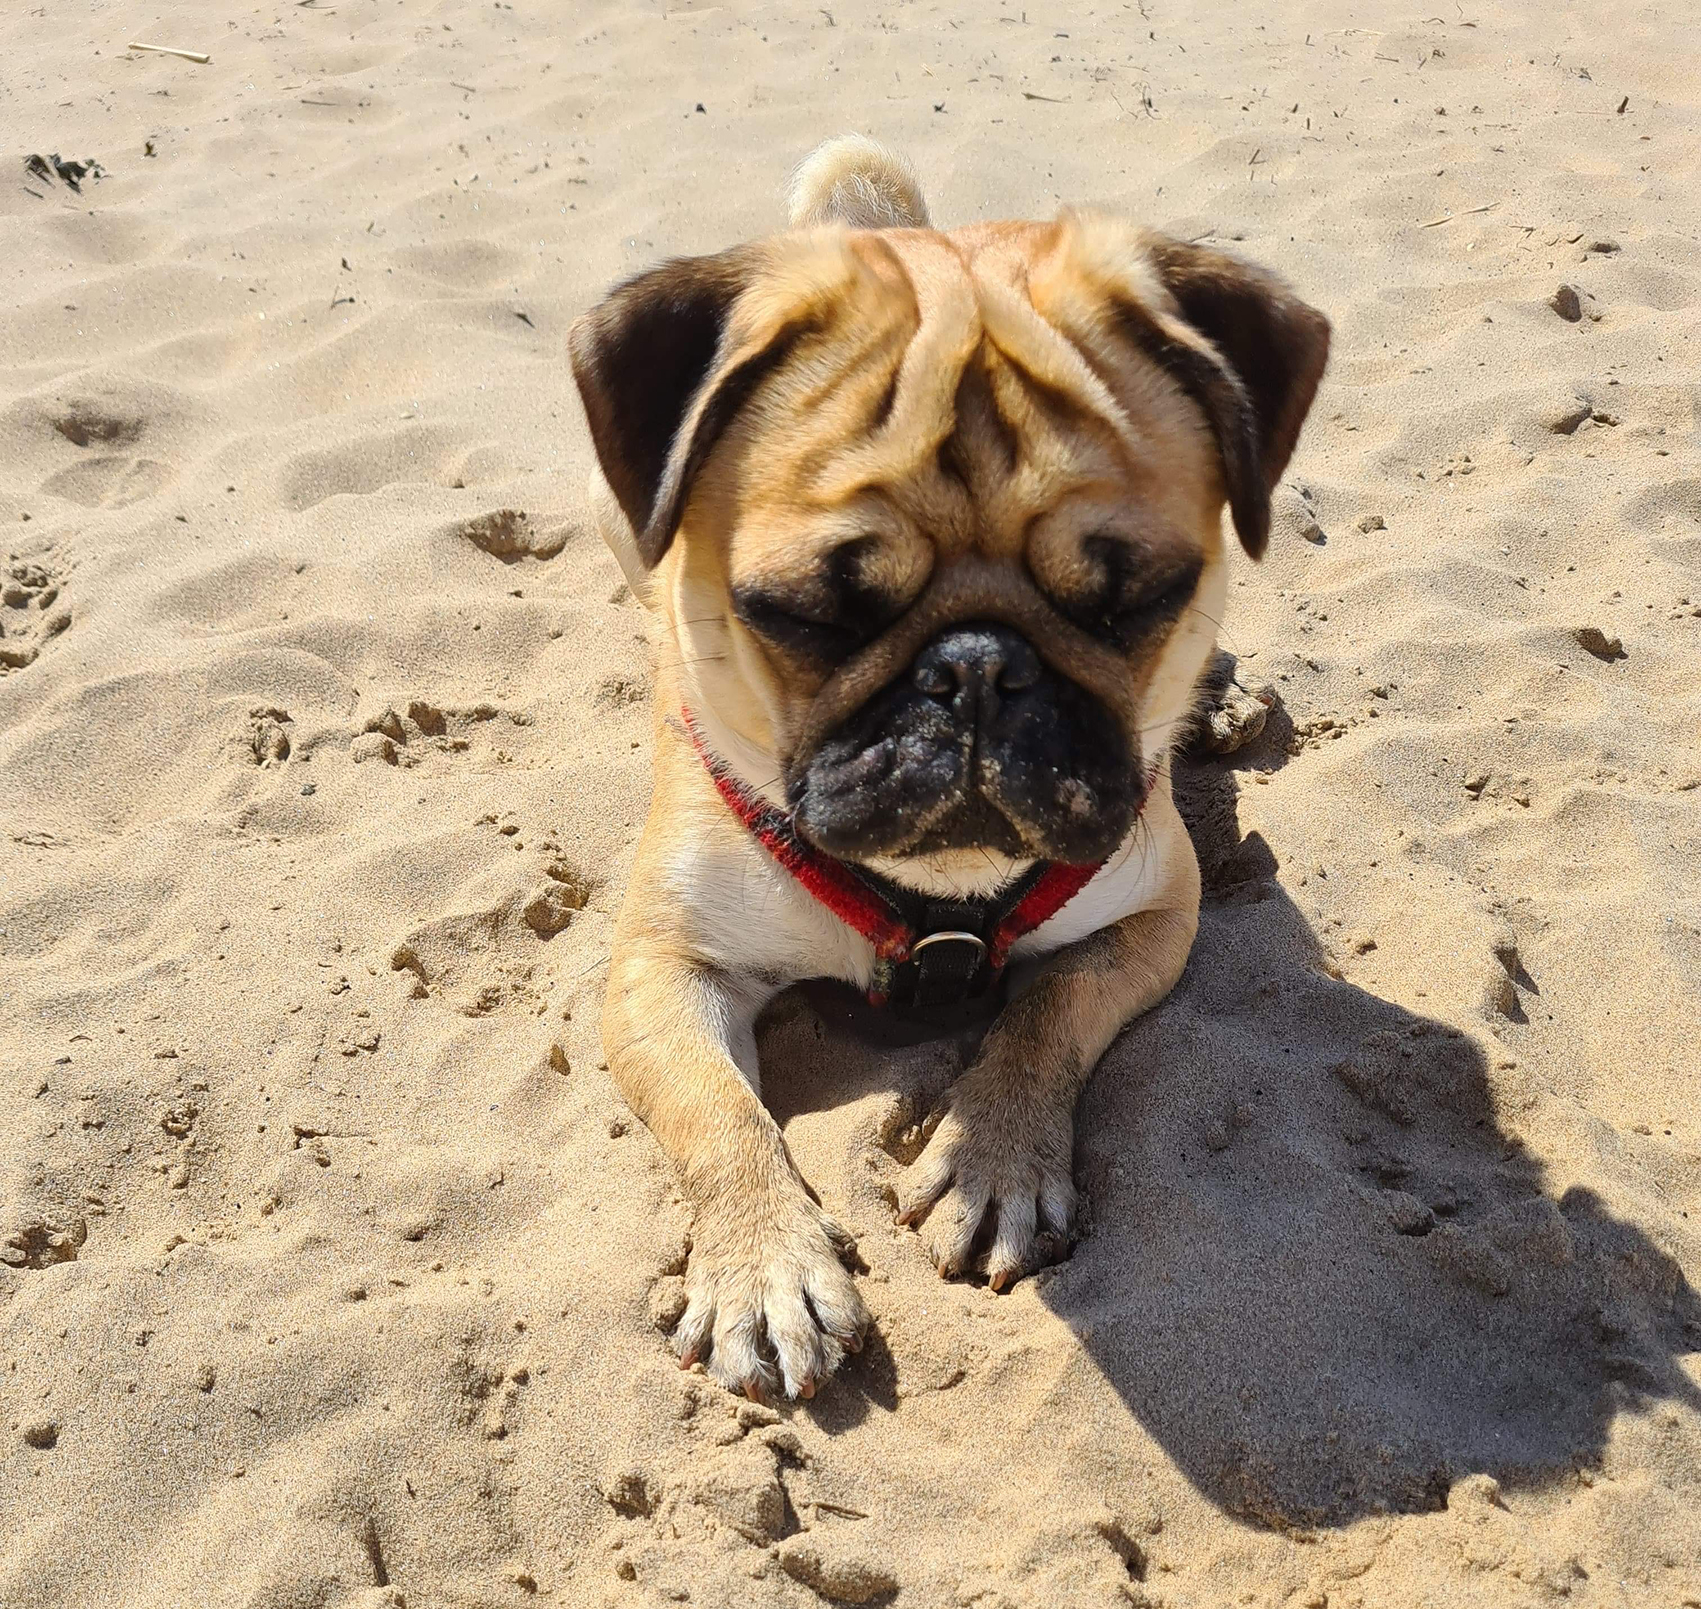 Peggy's wheels - image Beau on https://pugprotectiontrust.org